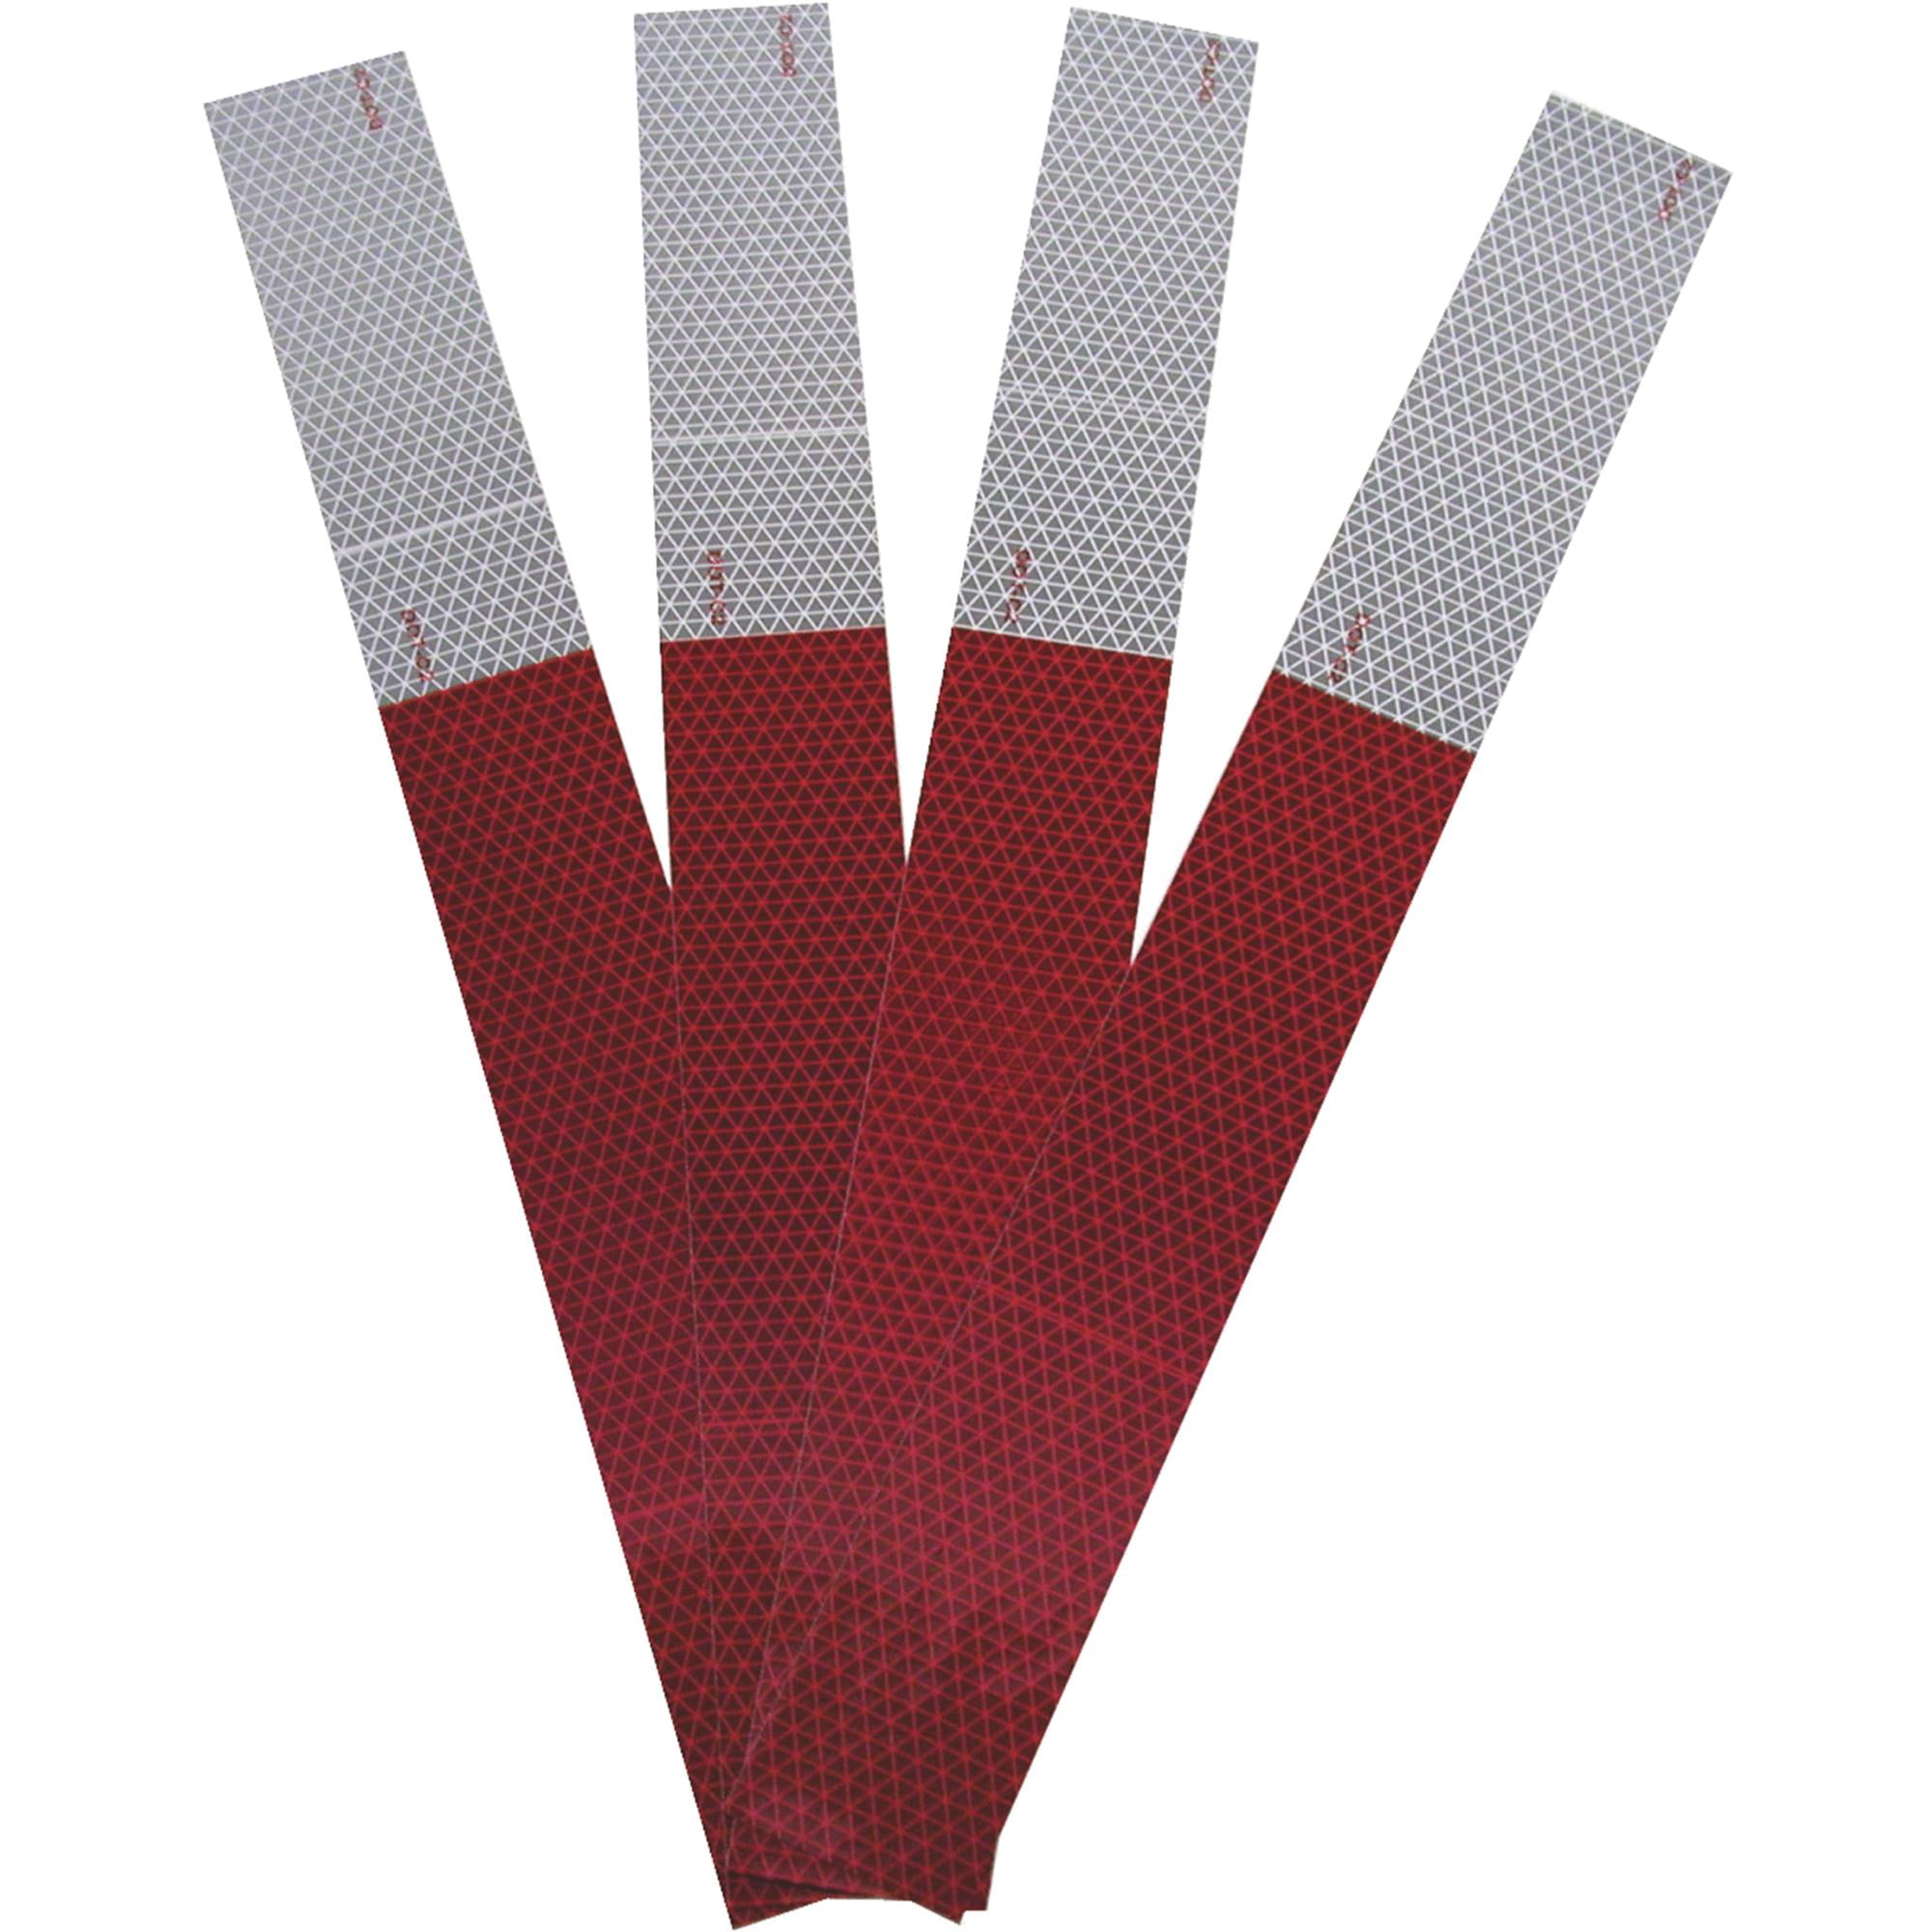 3M™ Reflective Tape Strips  2-Color Pack Lot of 12 Pieces 2 in x 18 in 